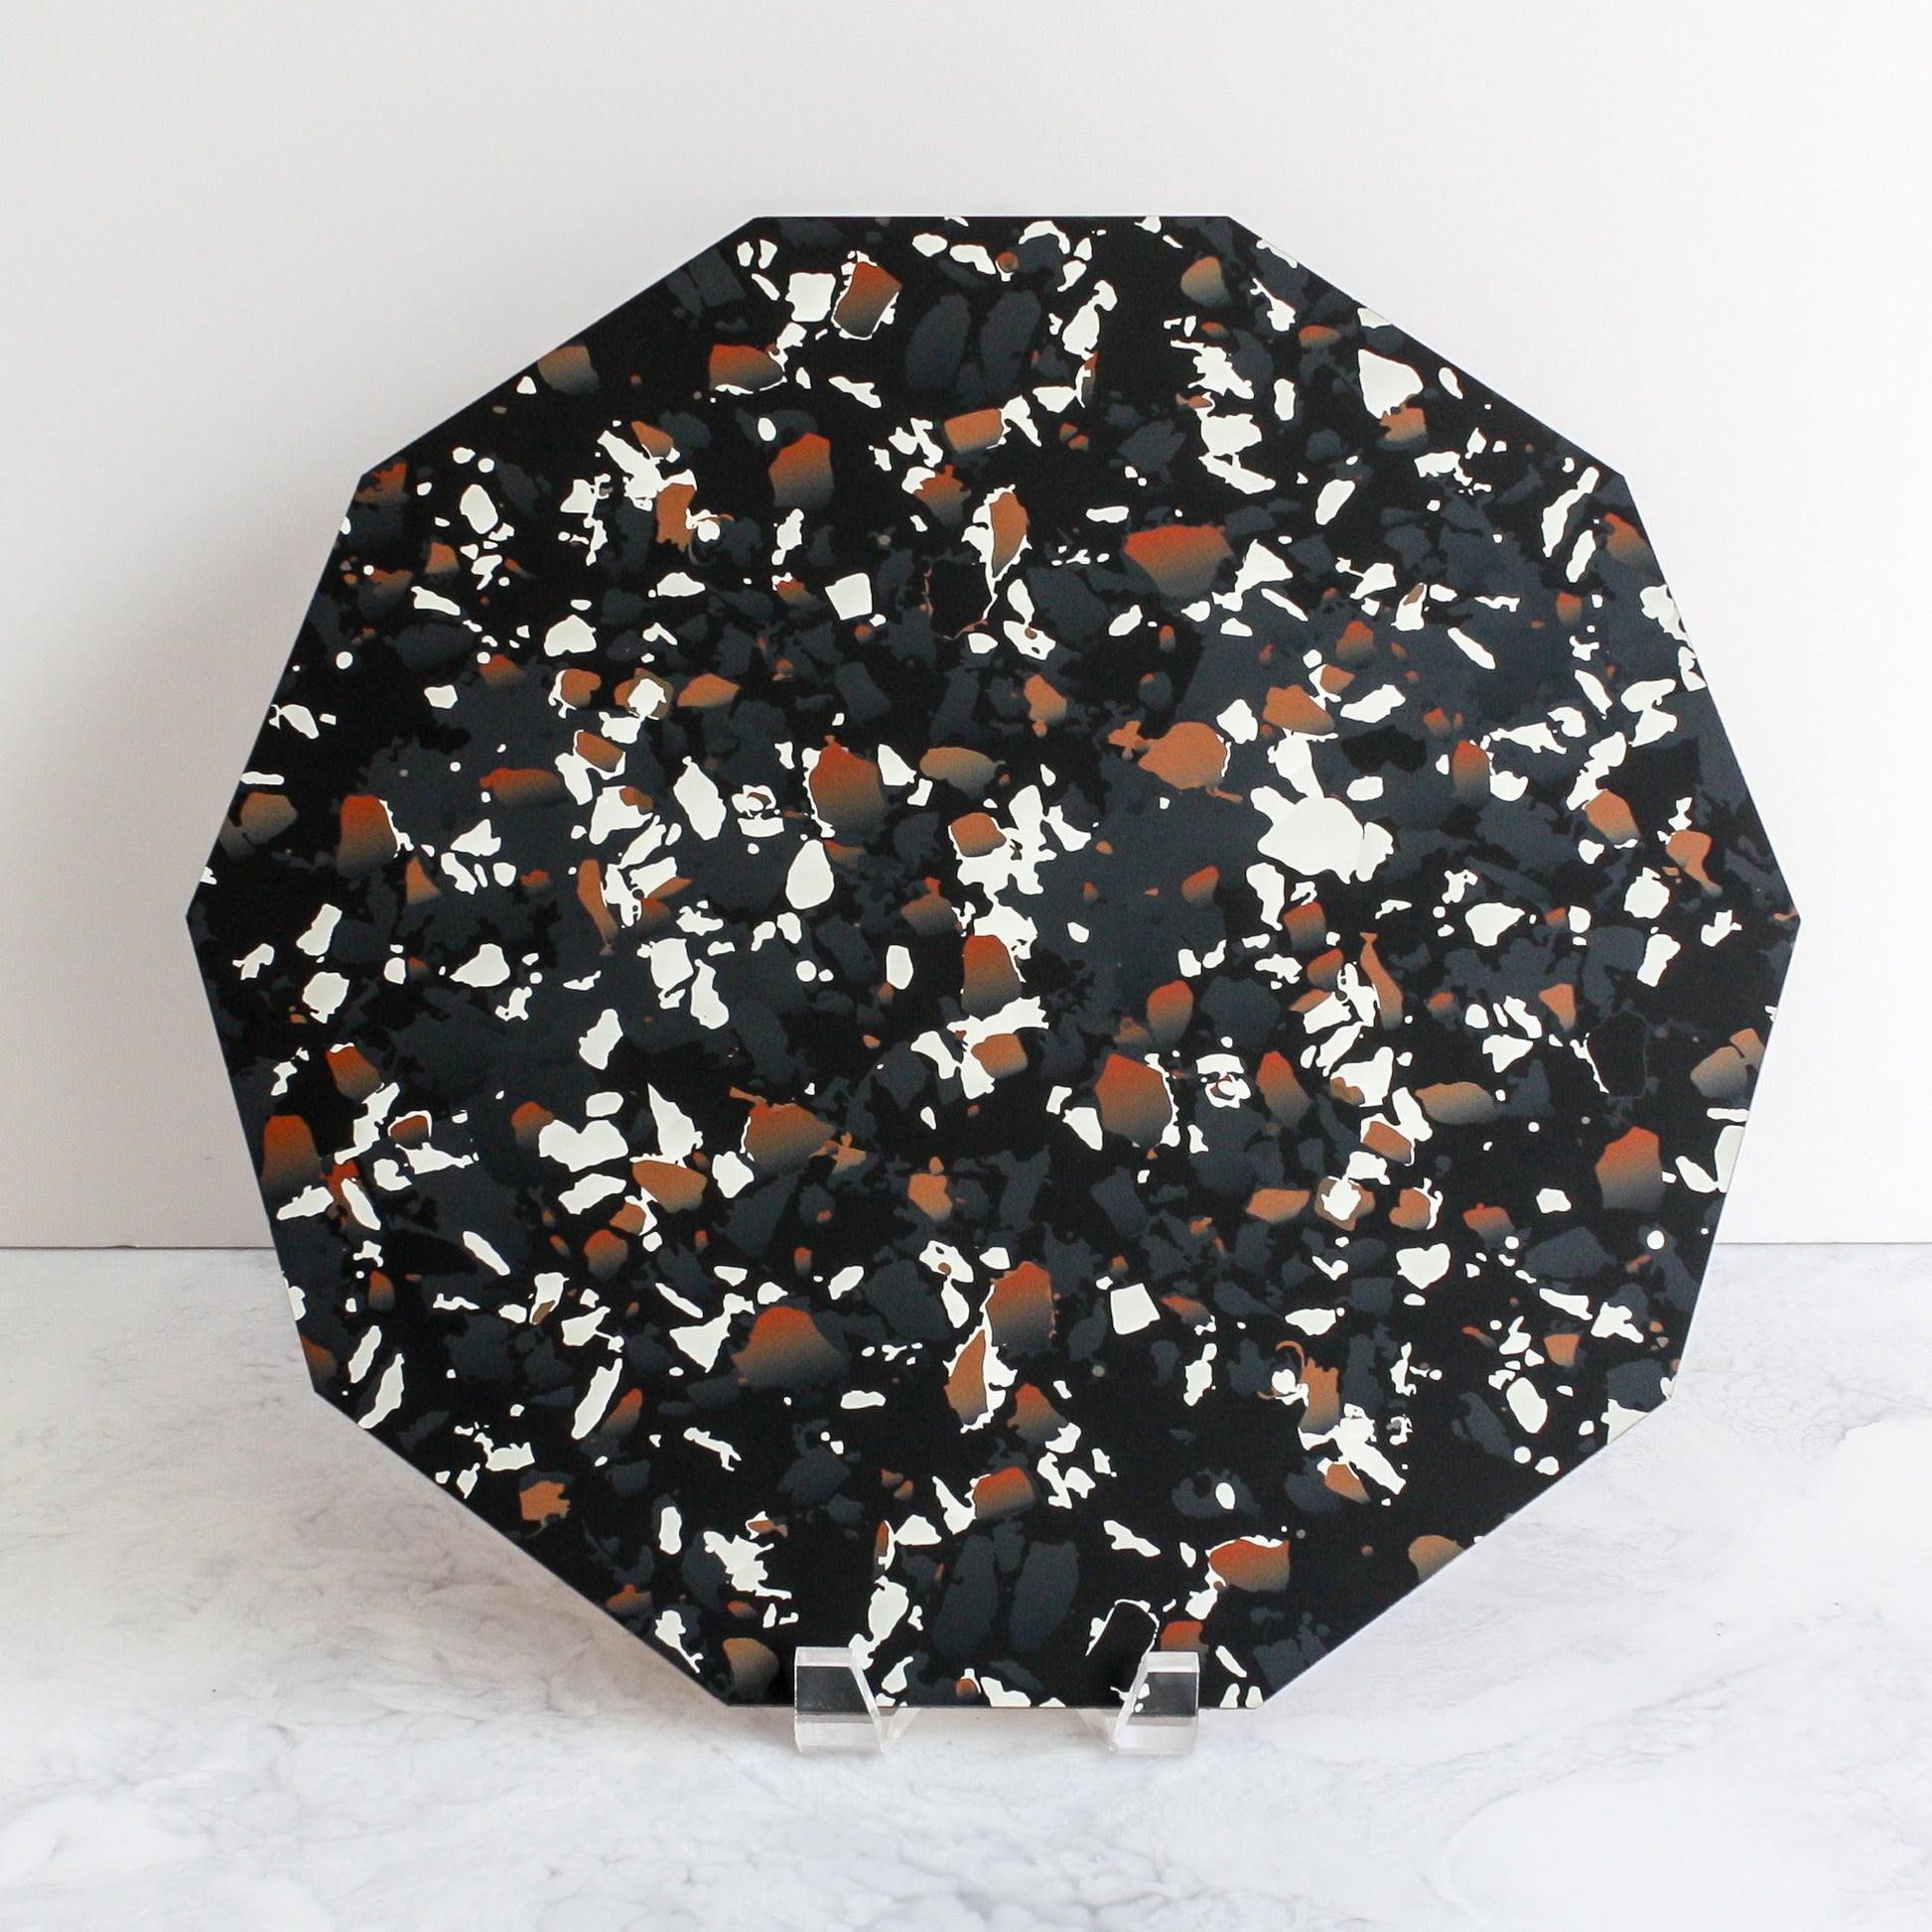 Terrazzo placemats in black made of cork and wood by Tisch New York